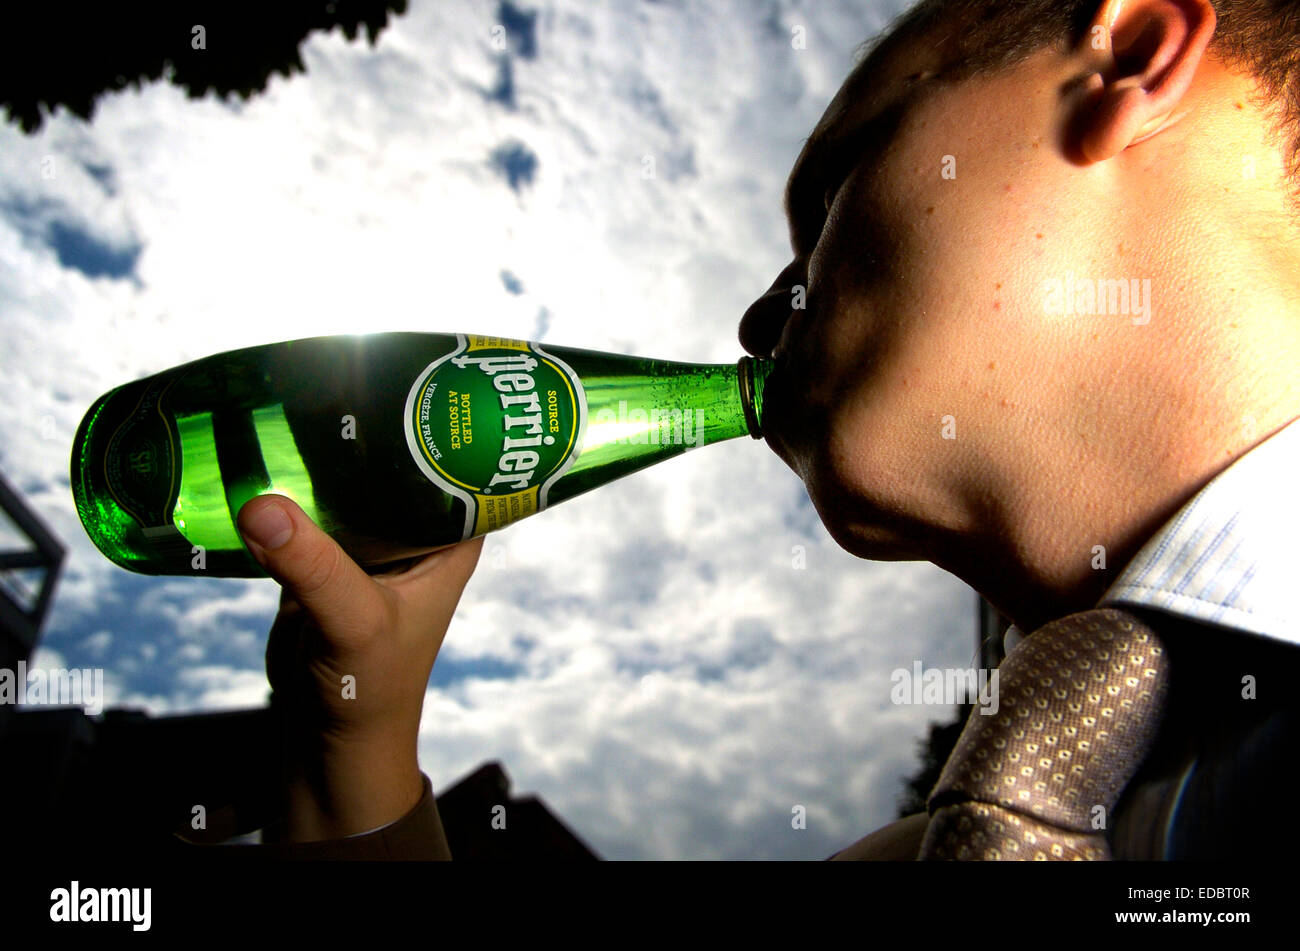 A man drinking Perrier bottled water. Stock Photo